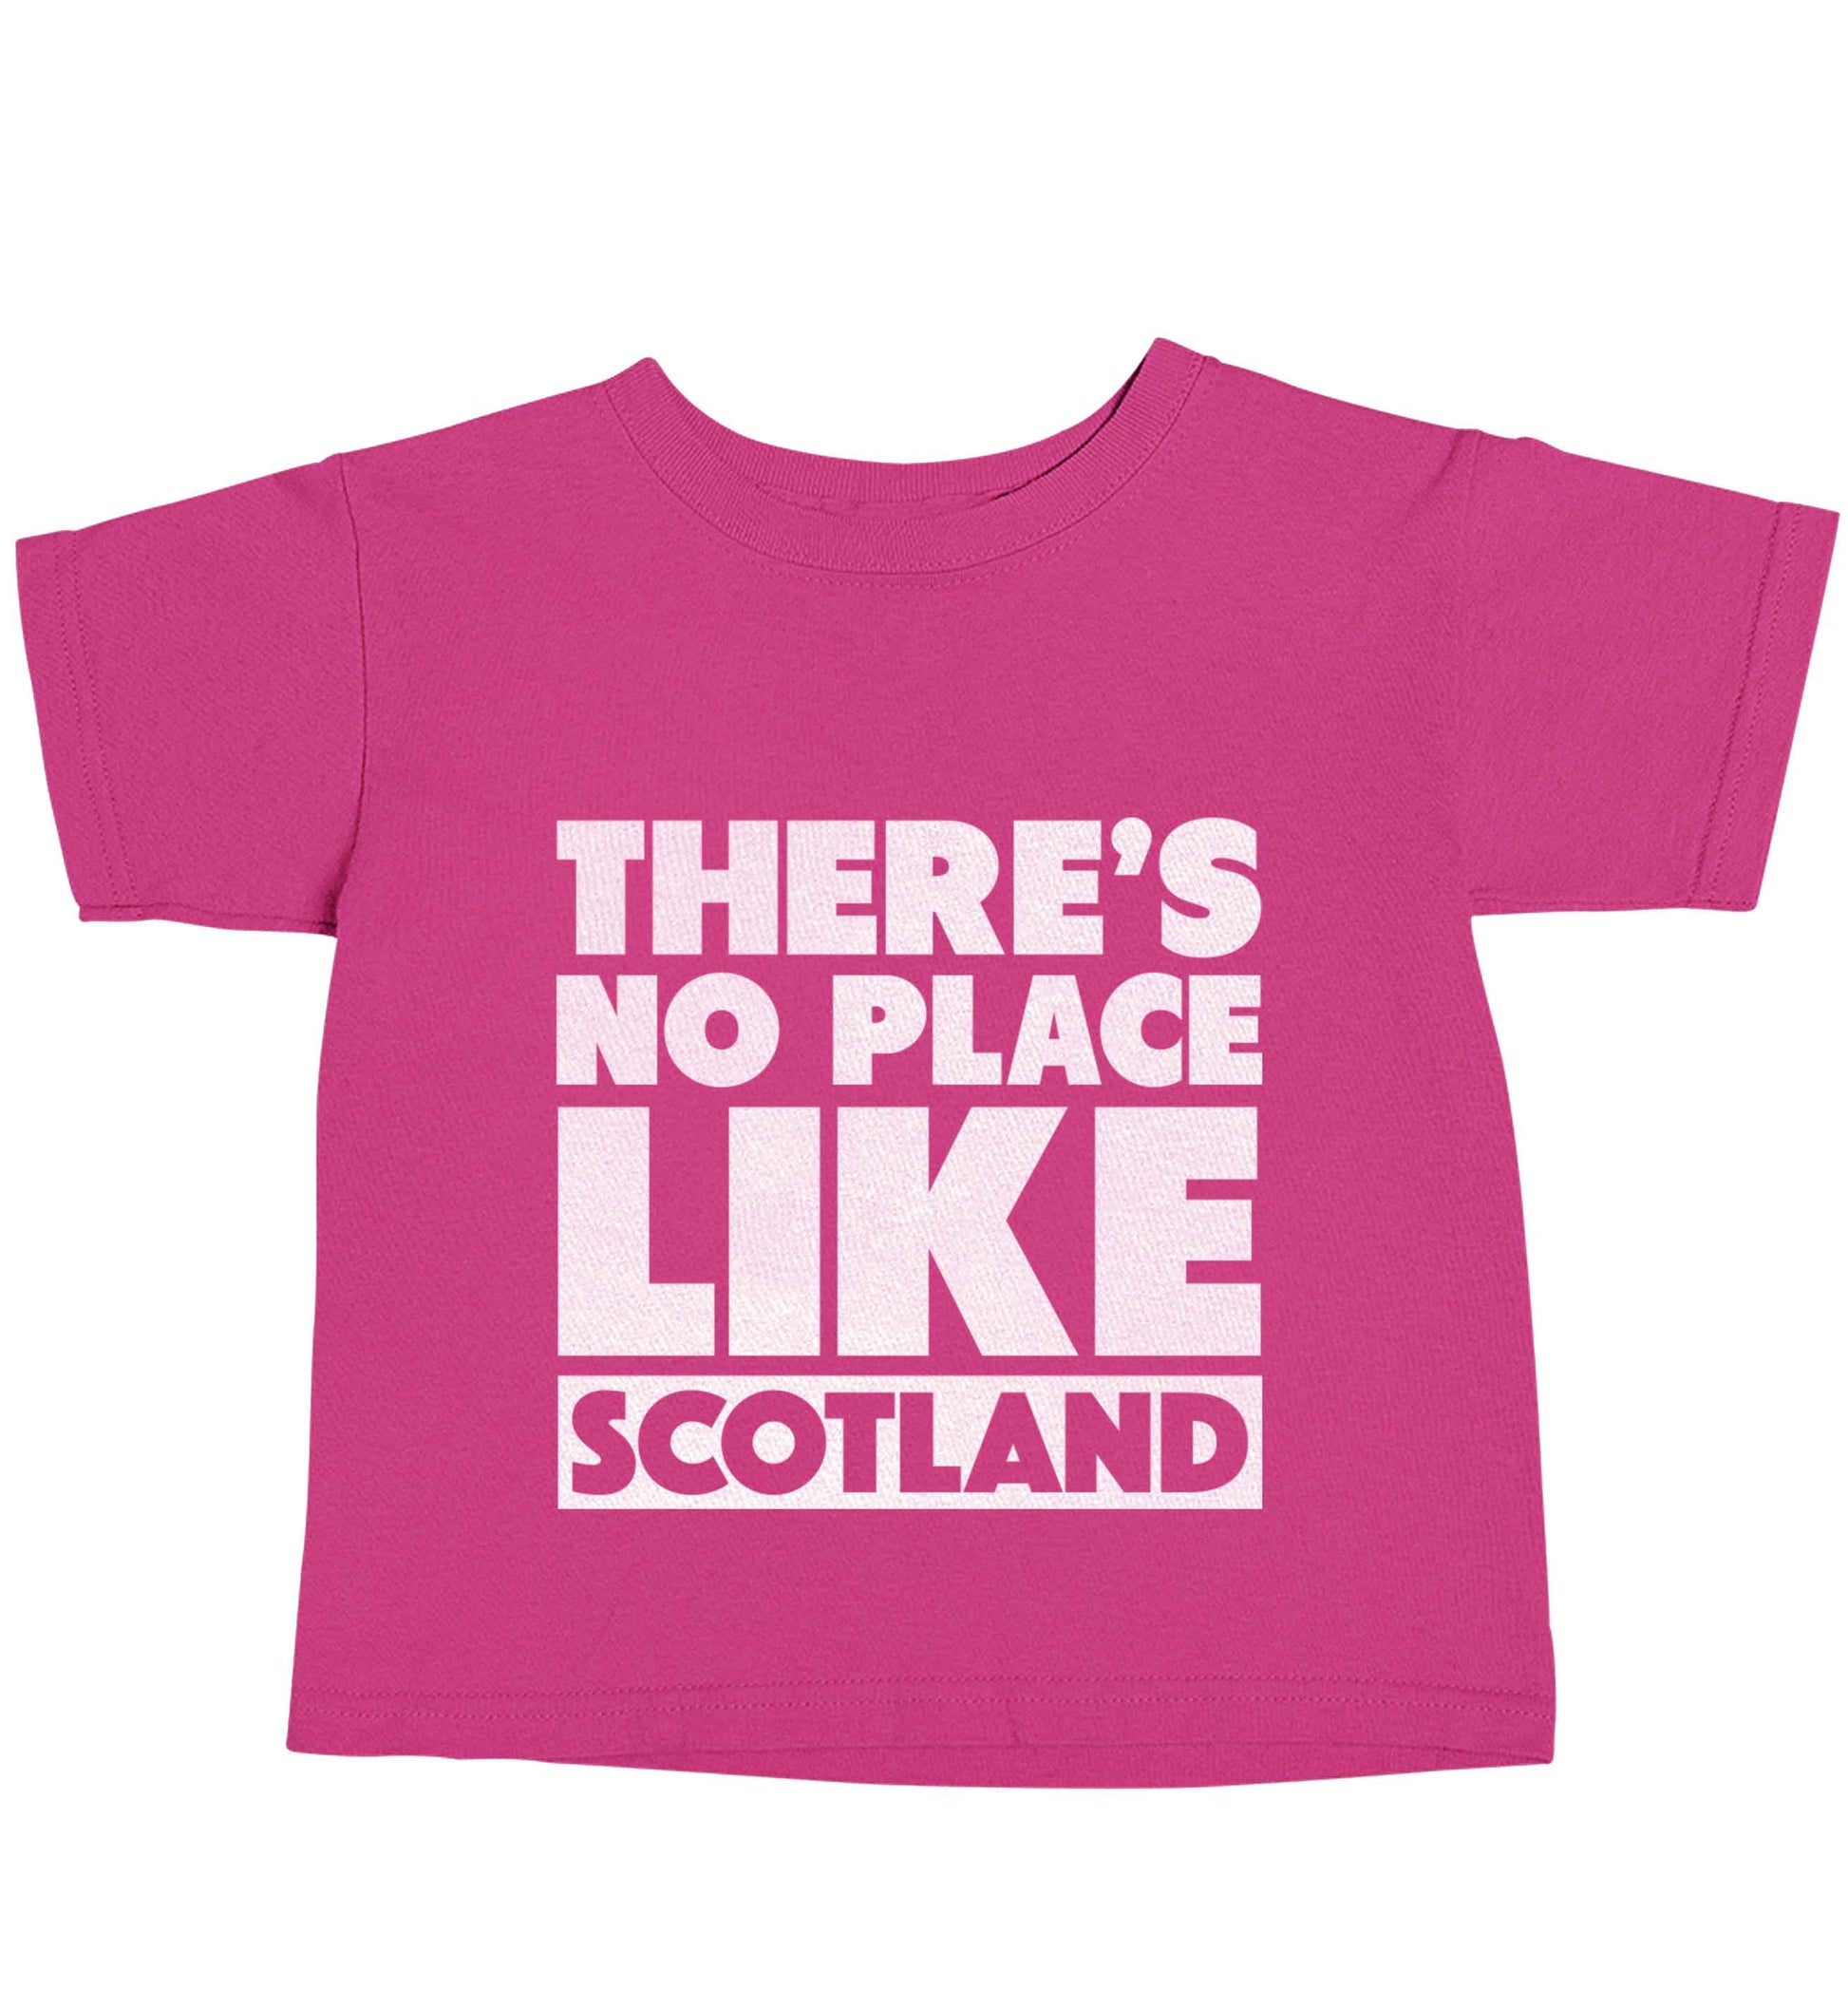 There's no place like Scotland pink baby toddler Tshirt 2 Years